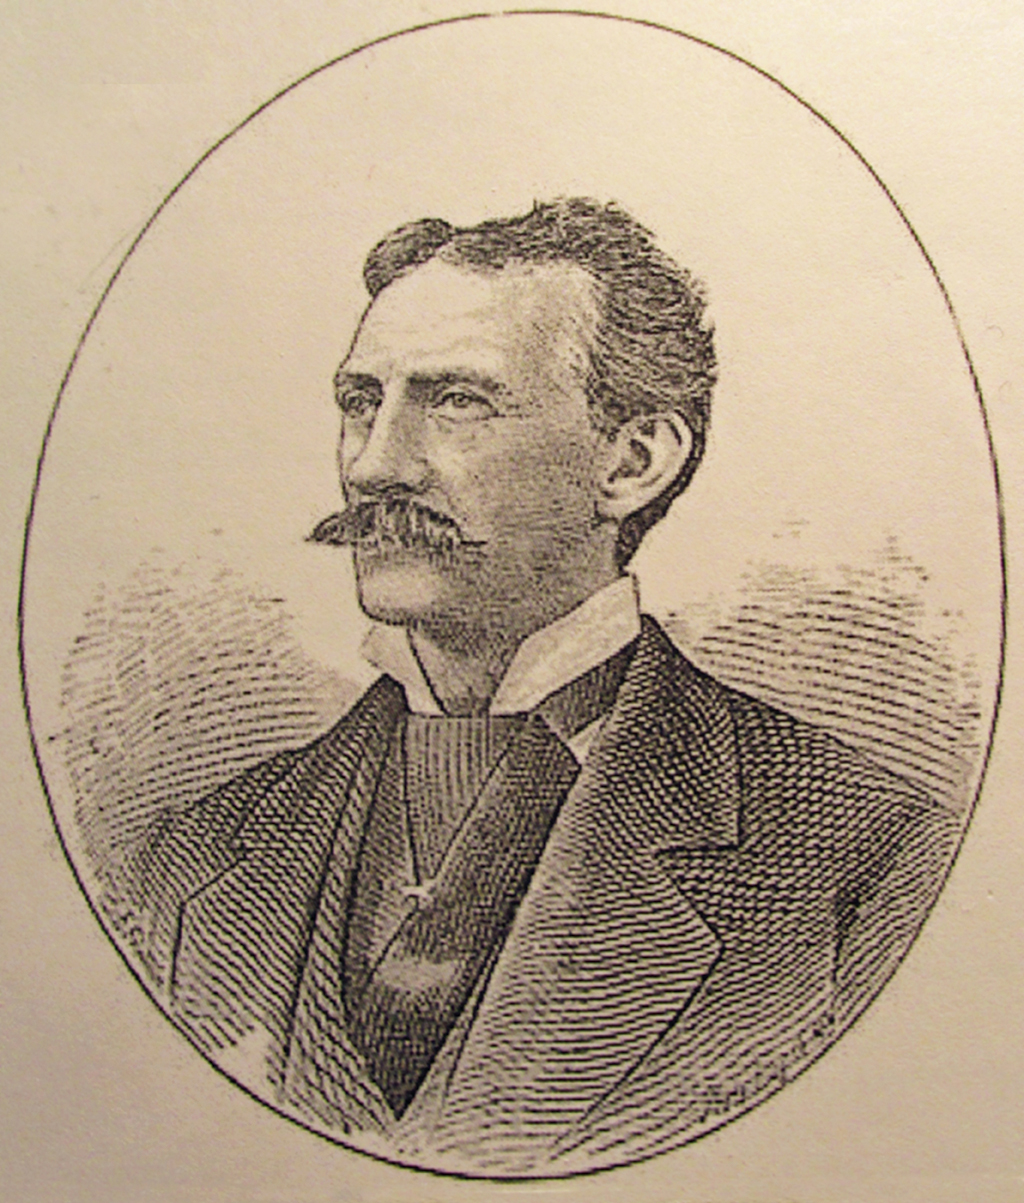 Charles Hallock, Editor of Forest and Stream Weekly, and the man who organized the Irish hunt in the West and accompanied the Irish Party.